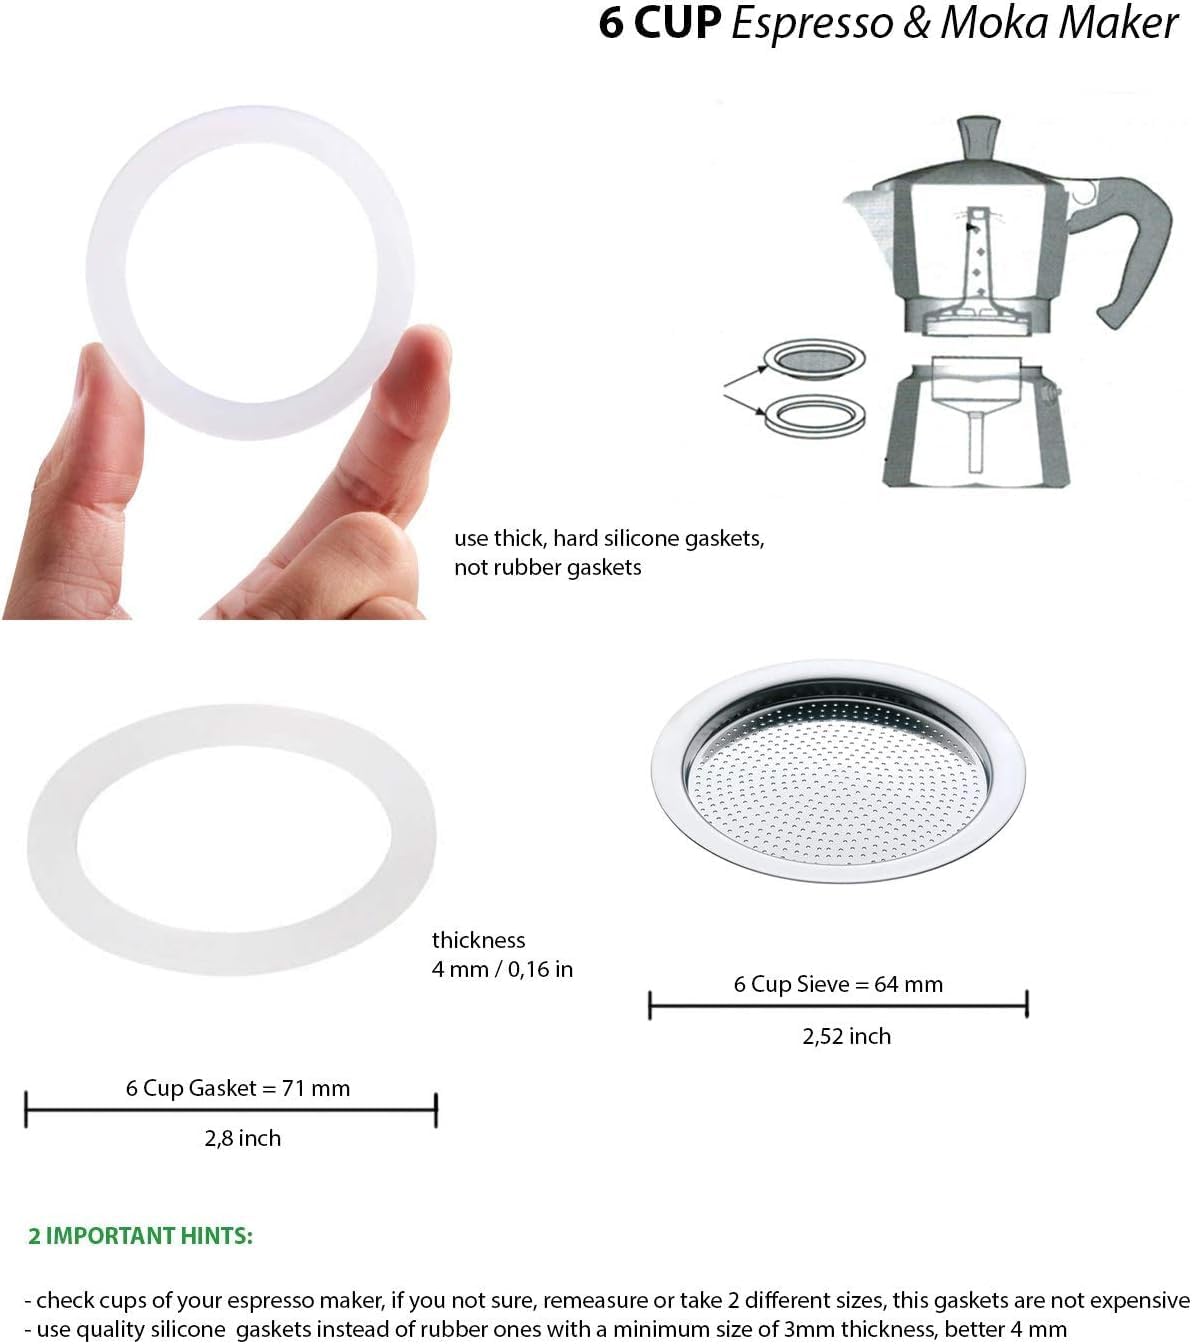 Replacement Funnel for 6 Cups Espresso Maker Blister Funnel for Mocha Cups, 6cup Espresso Cooker Strainer, E.G. TENCOMA, FITS in All (2 x Silicone Seal (71 mm) + strainer (64 mm) for 6 Cups Cookers)